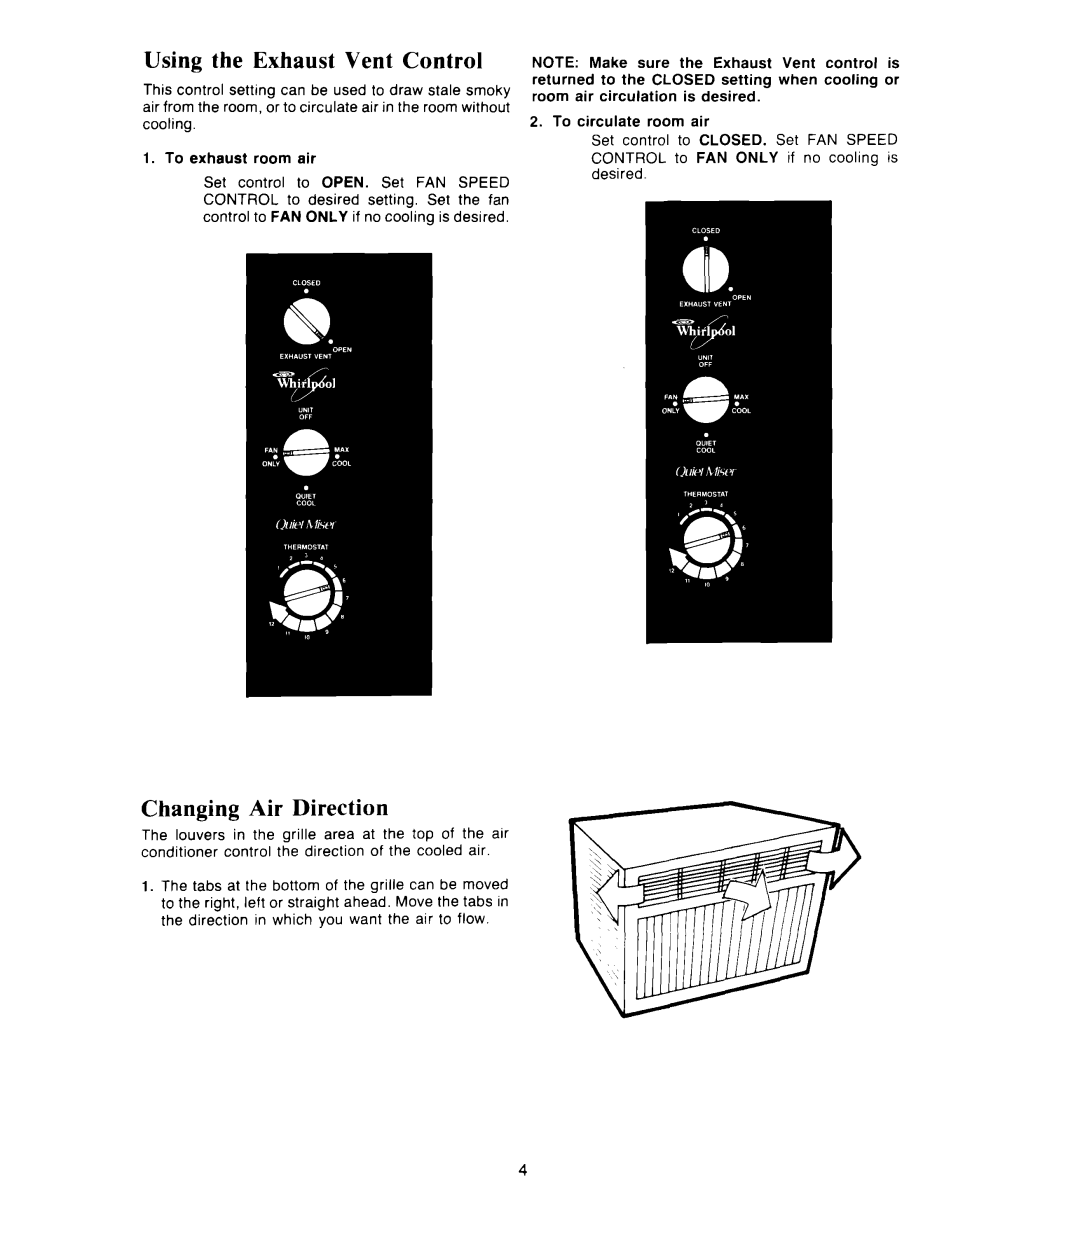 Whirlpool ACPS82, ACW082 manual Using the Exhaust Vent Control, Changing Air Direction 